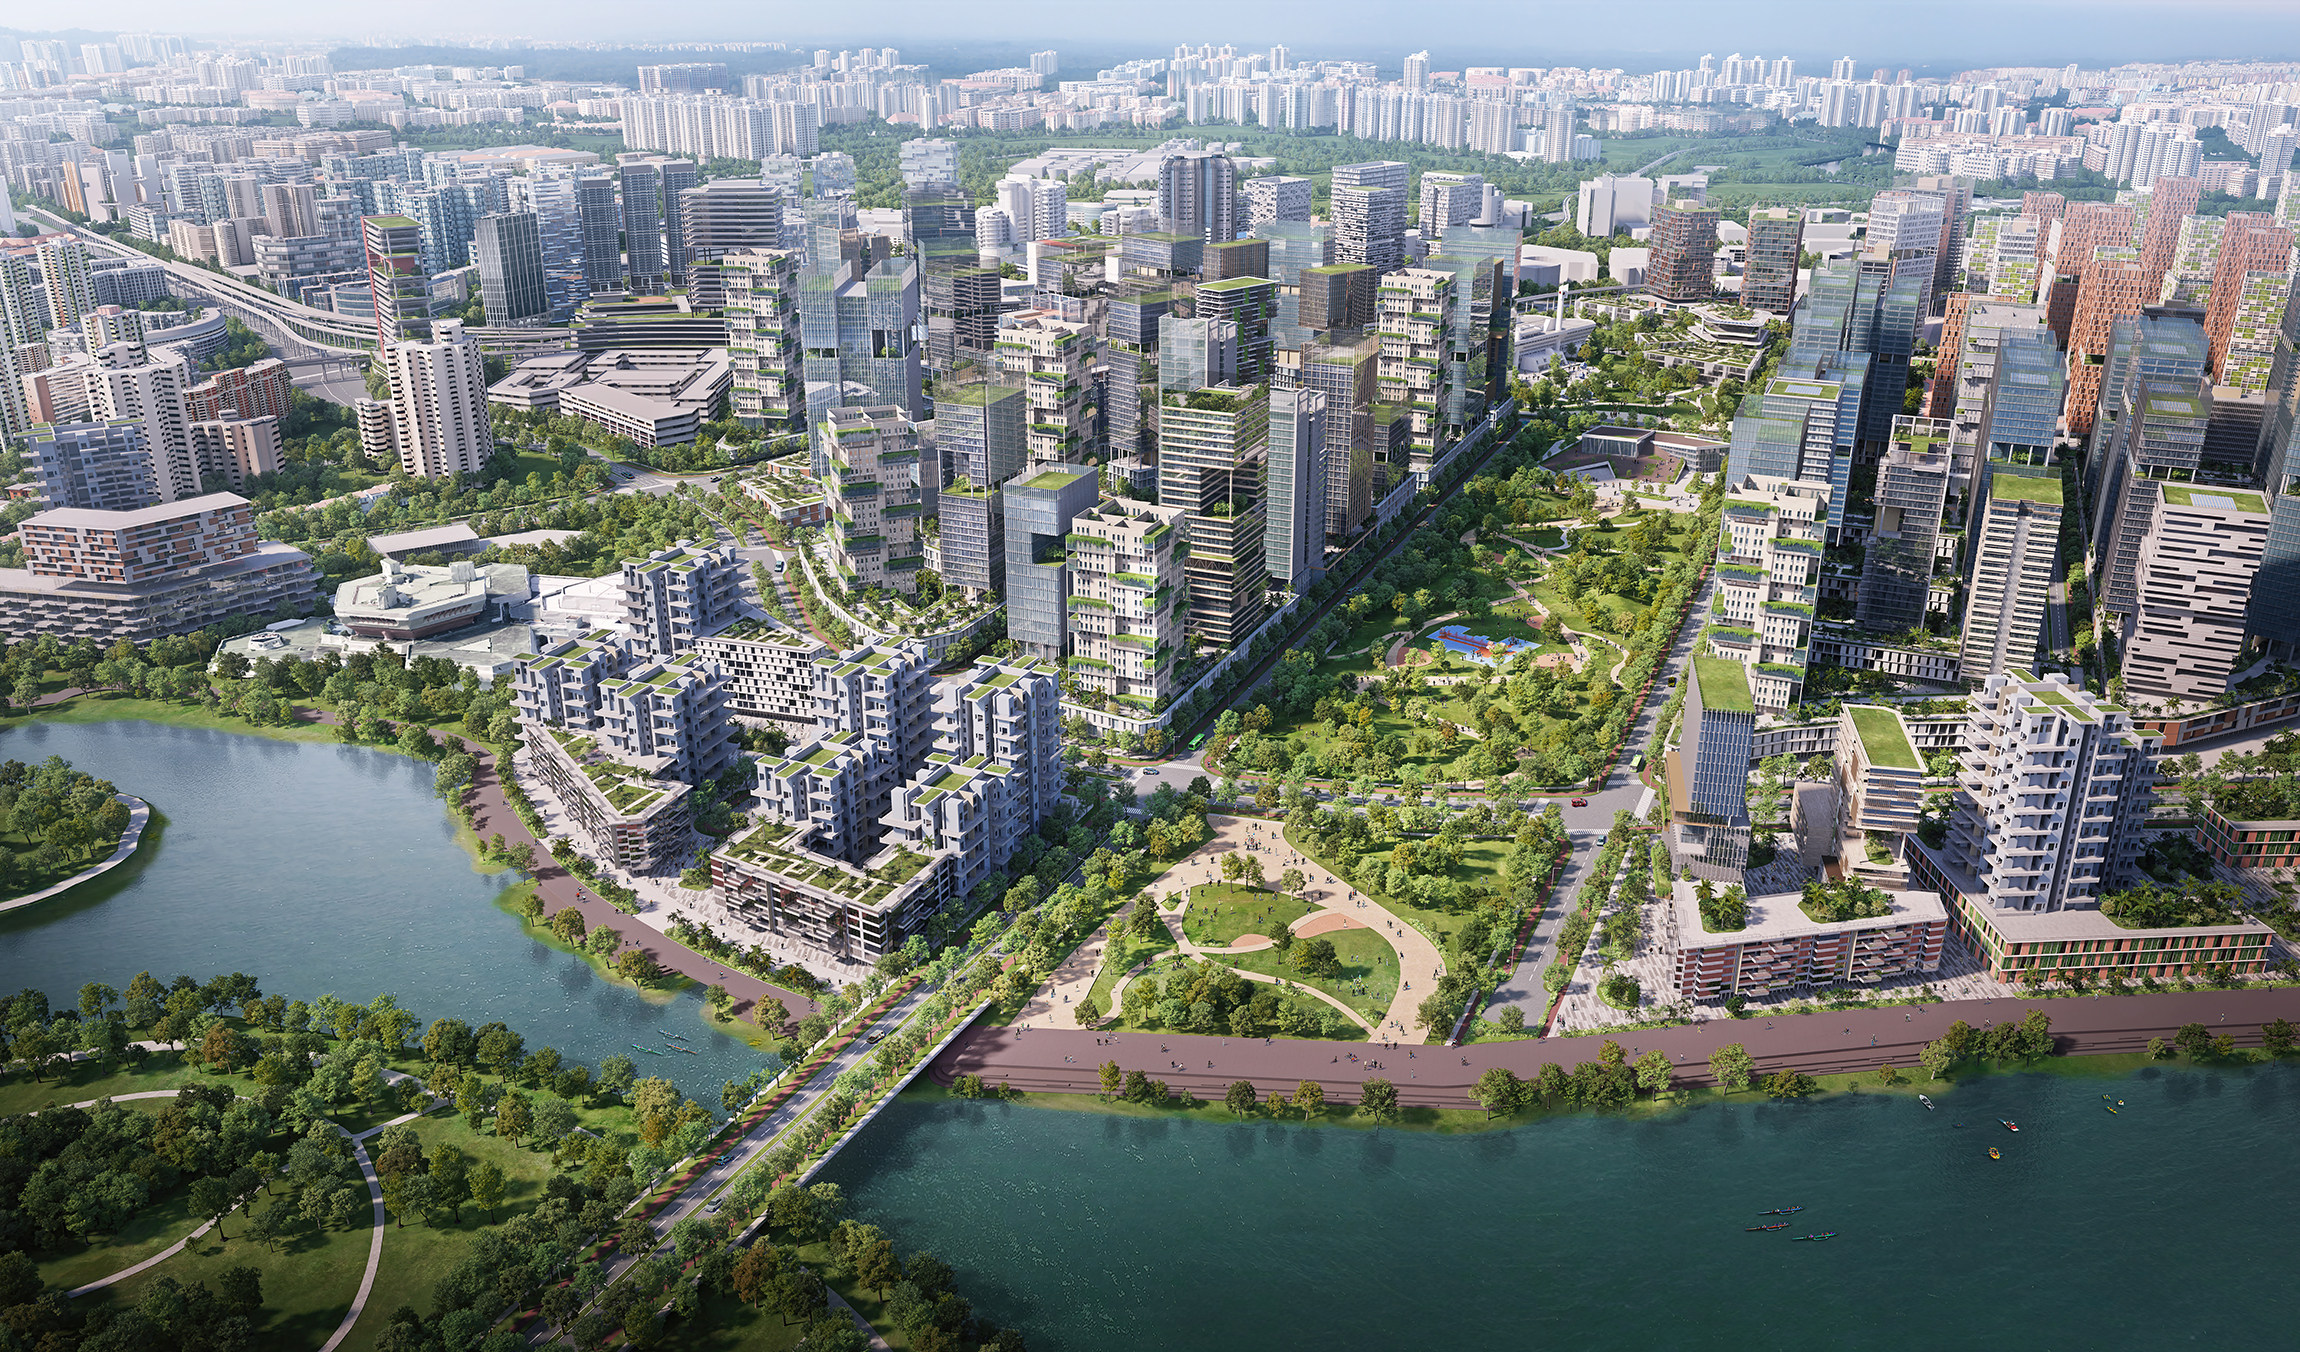 Artist’s impression of the promenade and green spine connecting the new precinct to Jurong Lake. Photo: Urban Redevelopment Authority